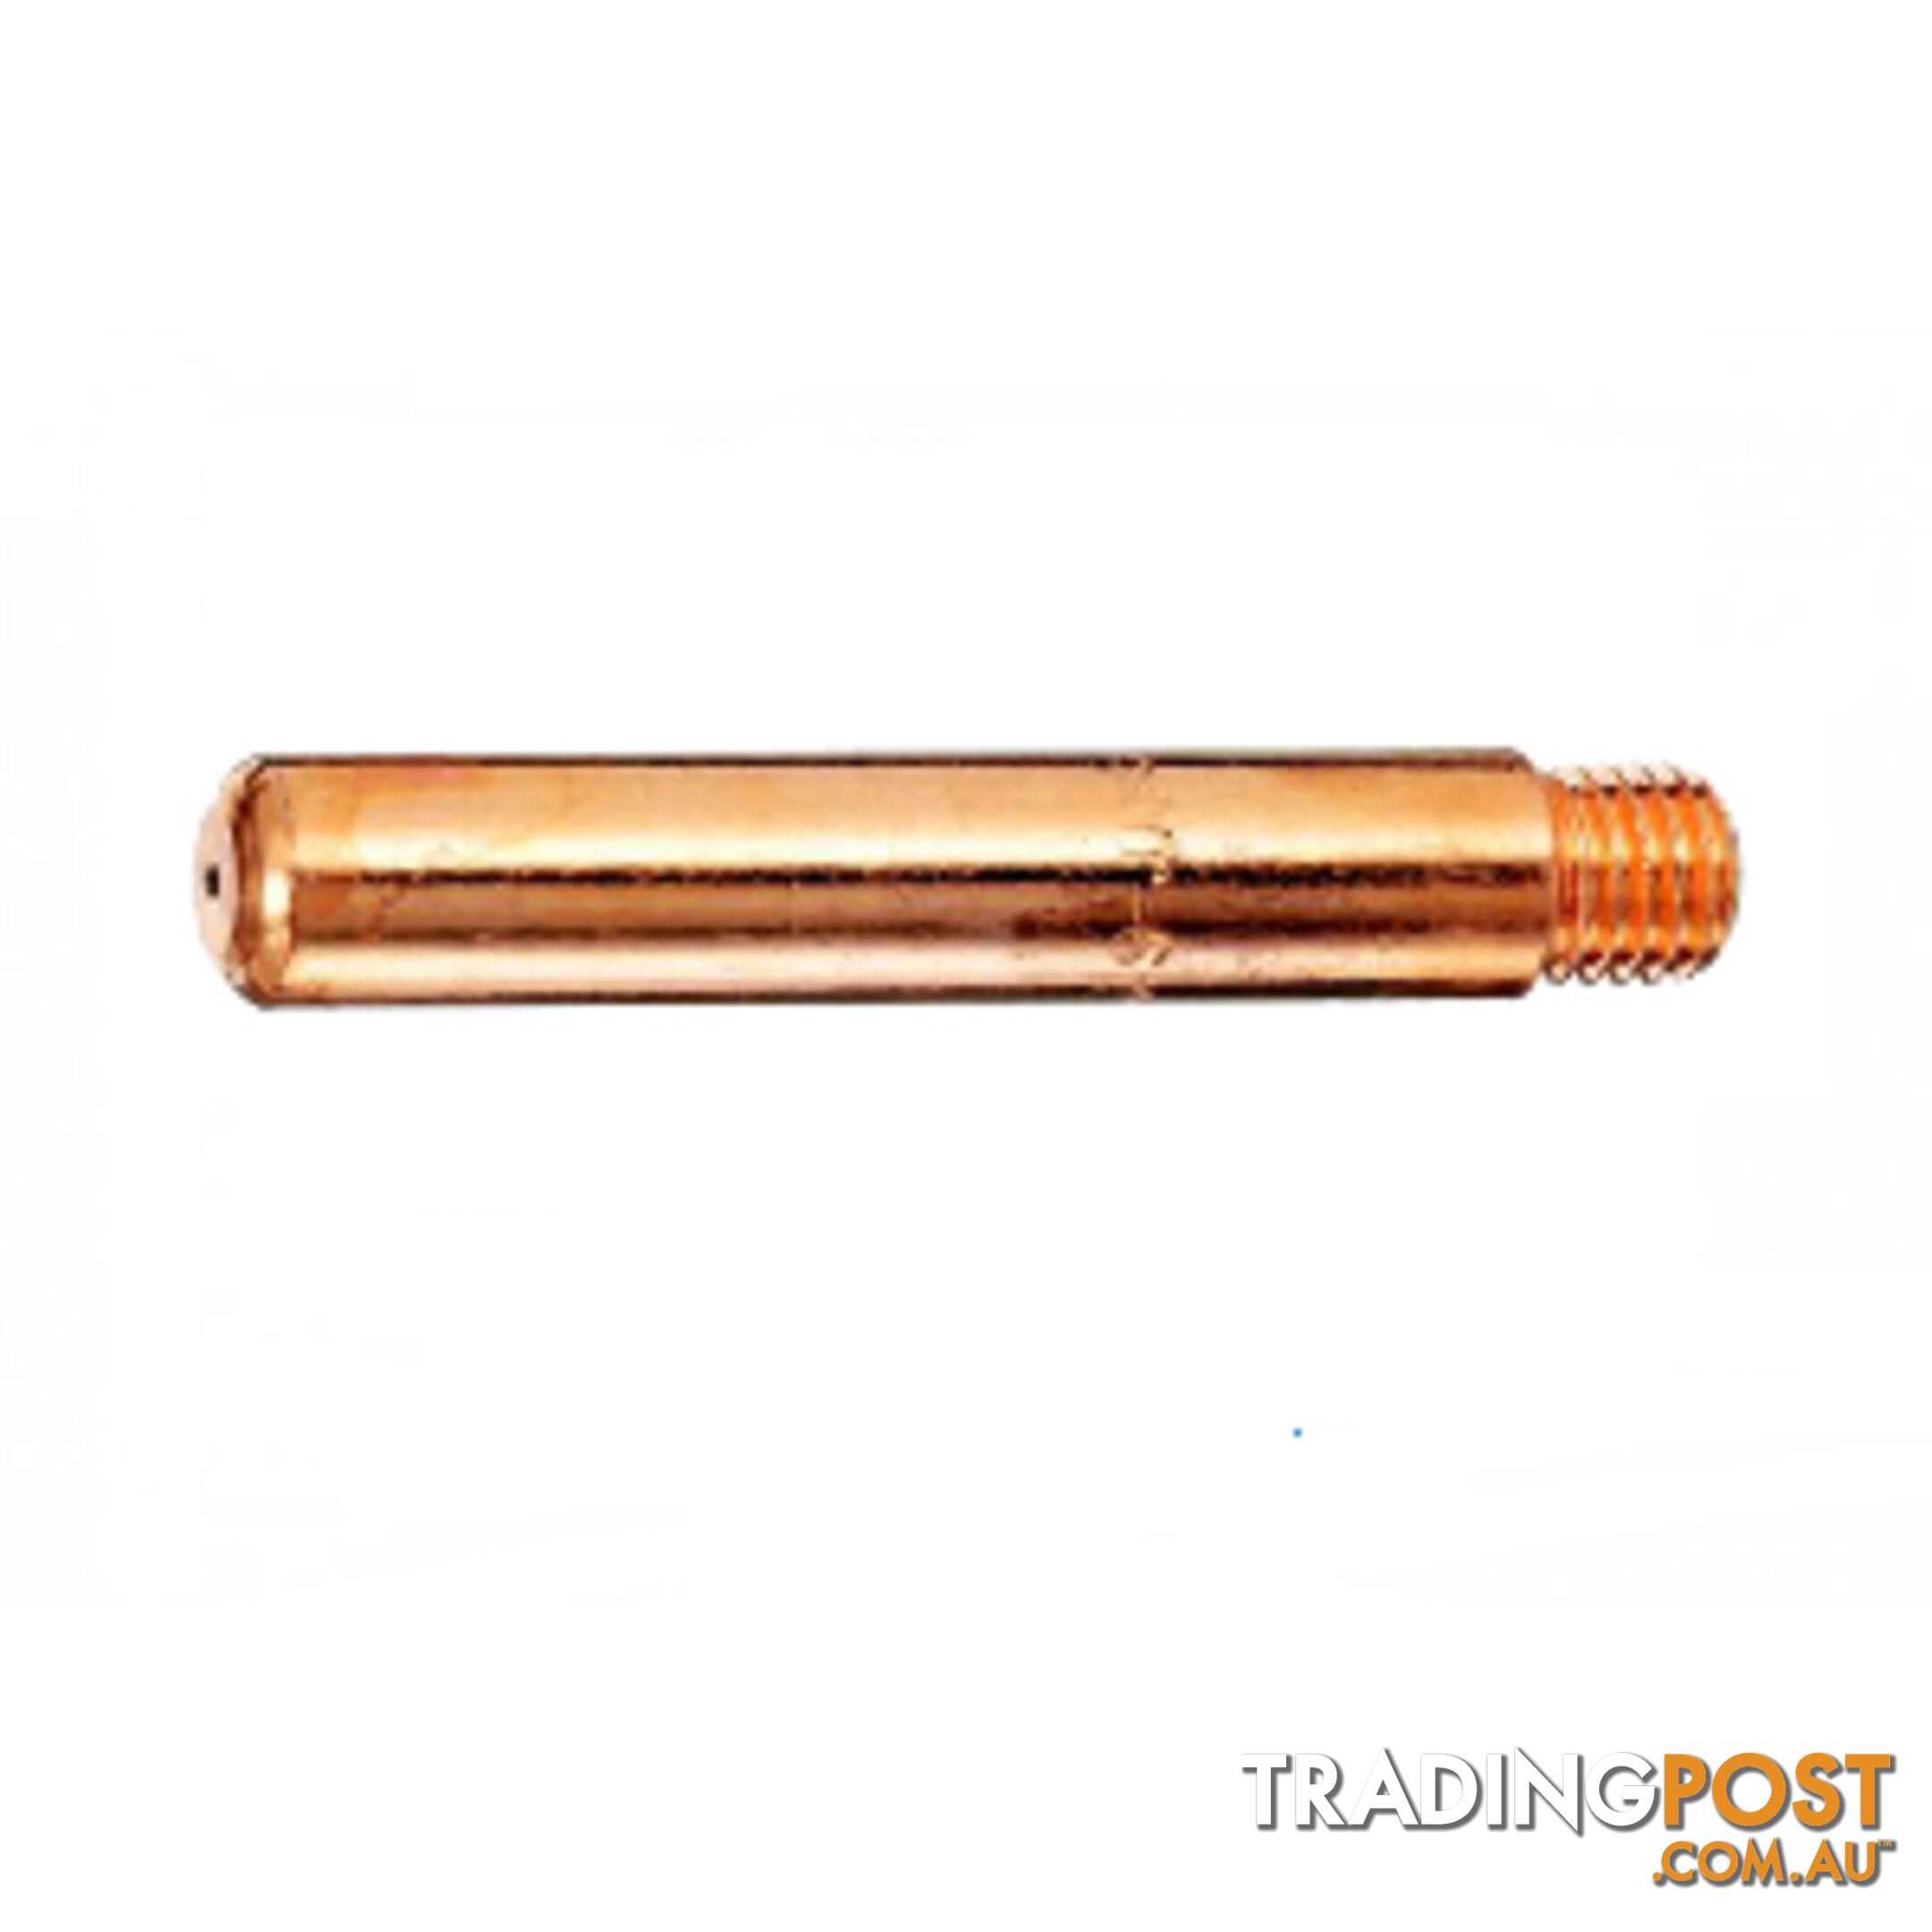 1.0mm Contact Tip Heavy Duty TWECO STYLE 14H40